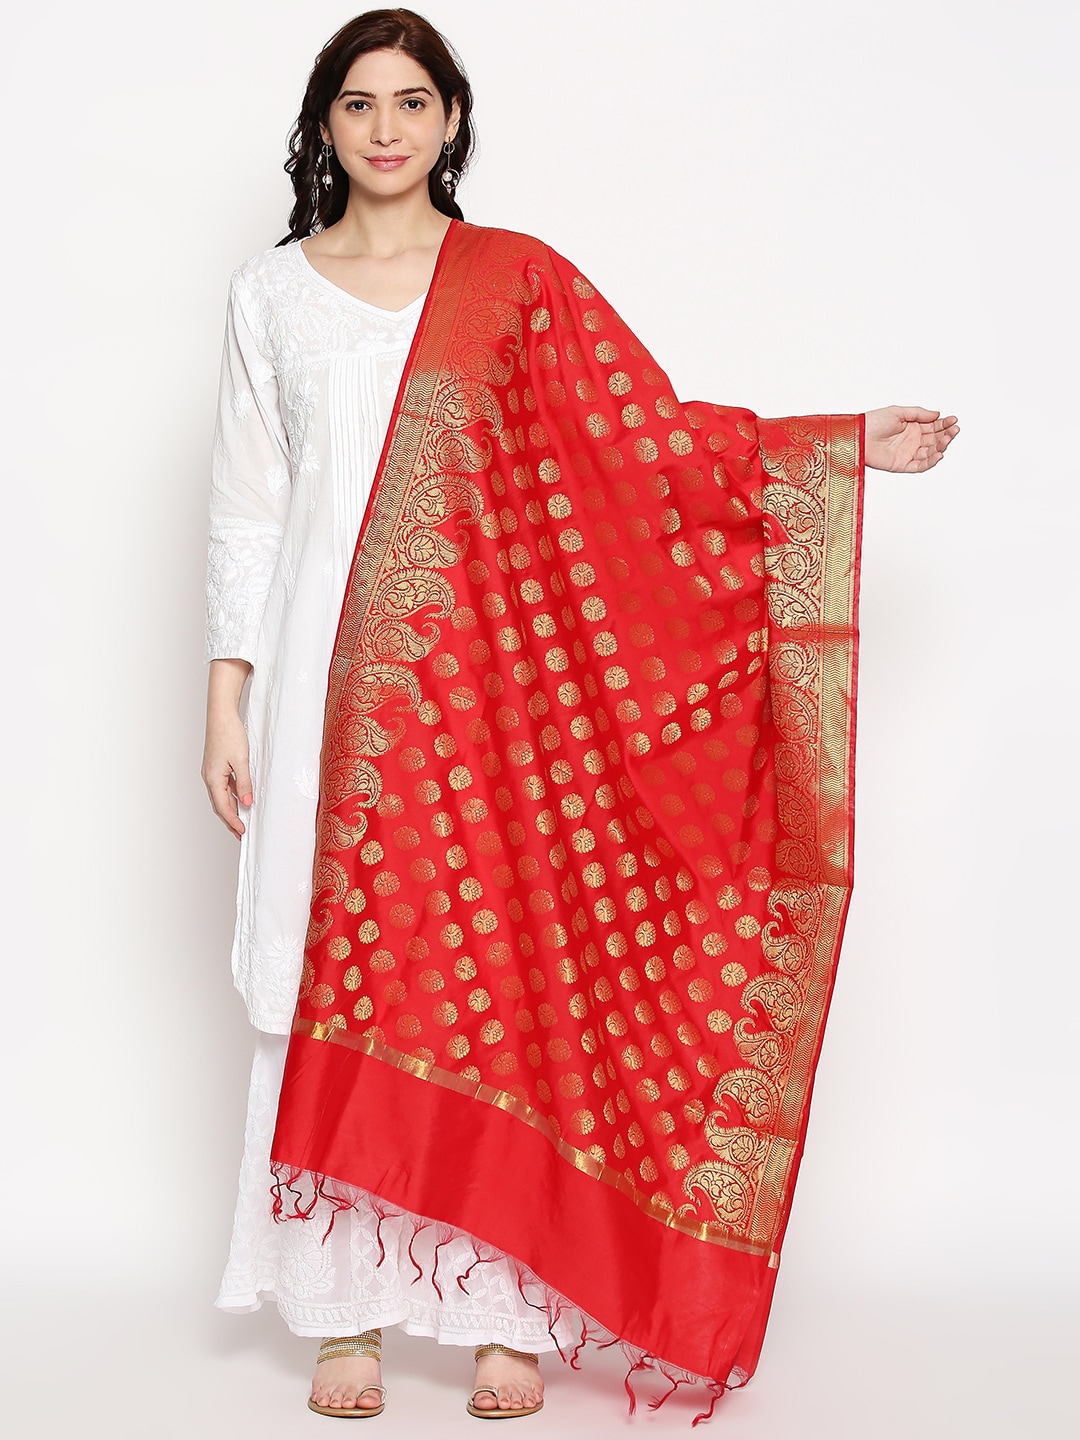 RANGMANCH BY PANTALOONS Women Red & Gold Foil Print Dupatta Price in India